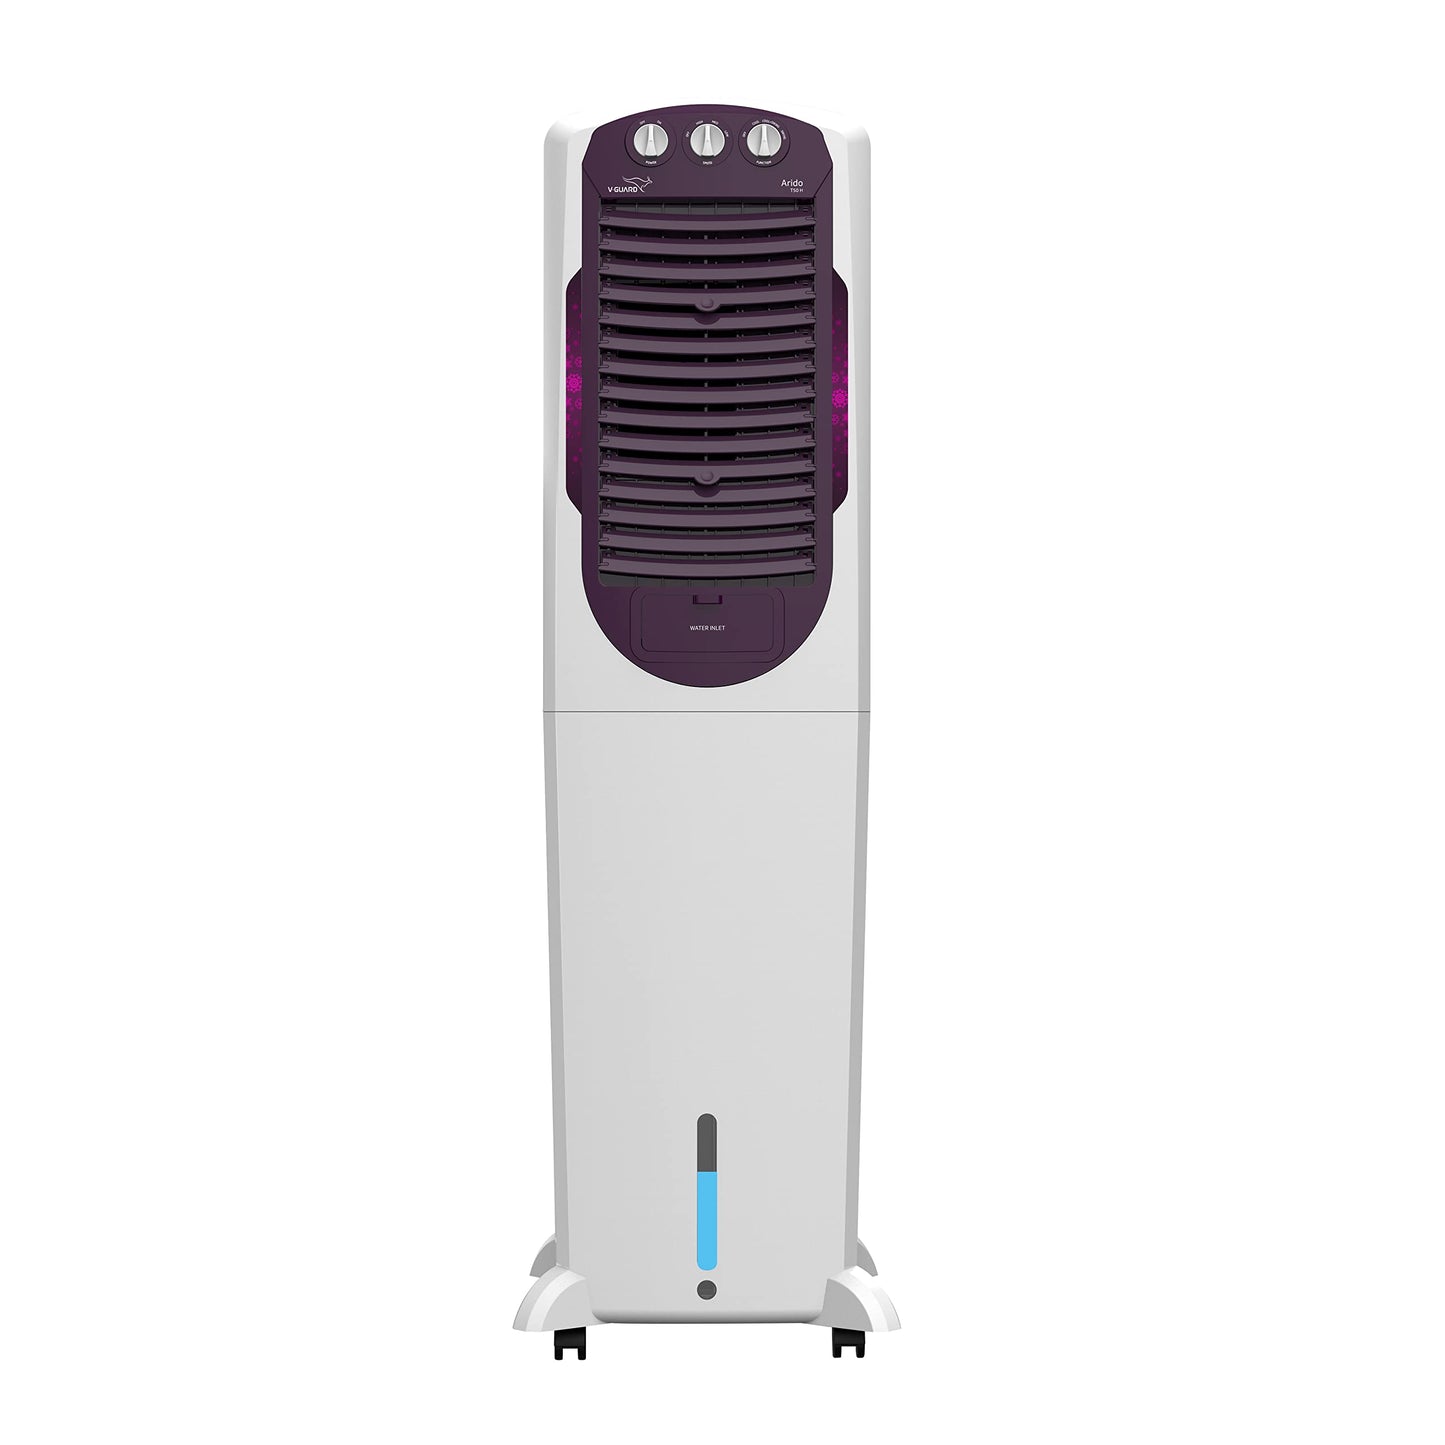 Arido T50 H Air Cooler 50L, Air Delivery - 1300 m3/h